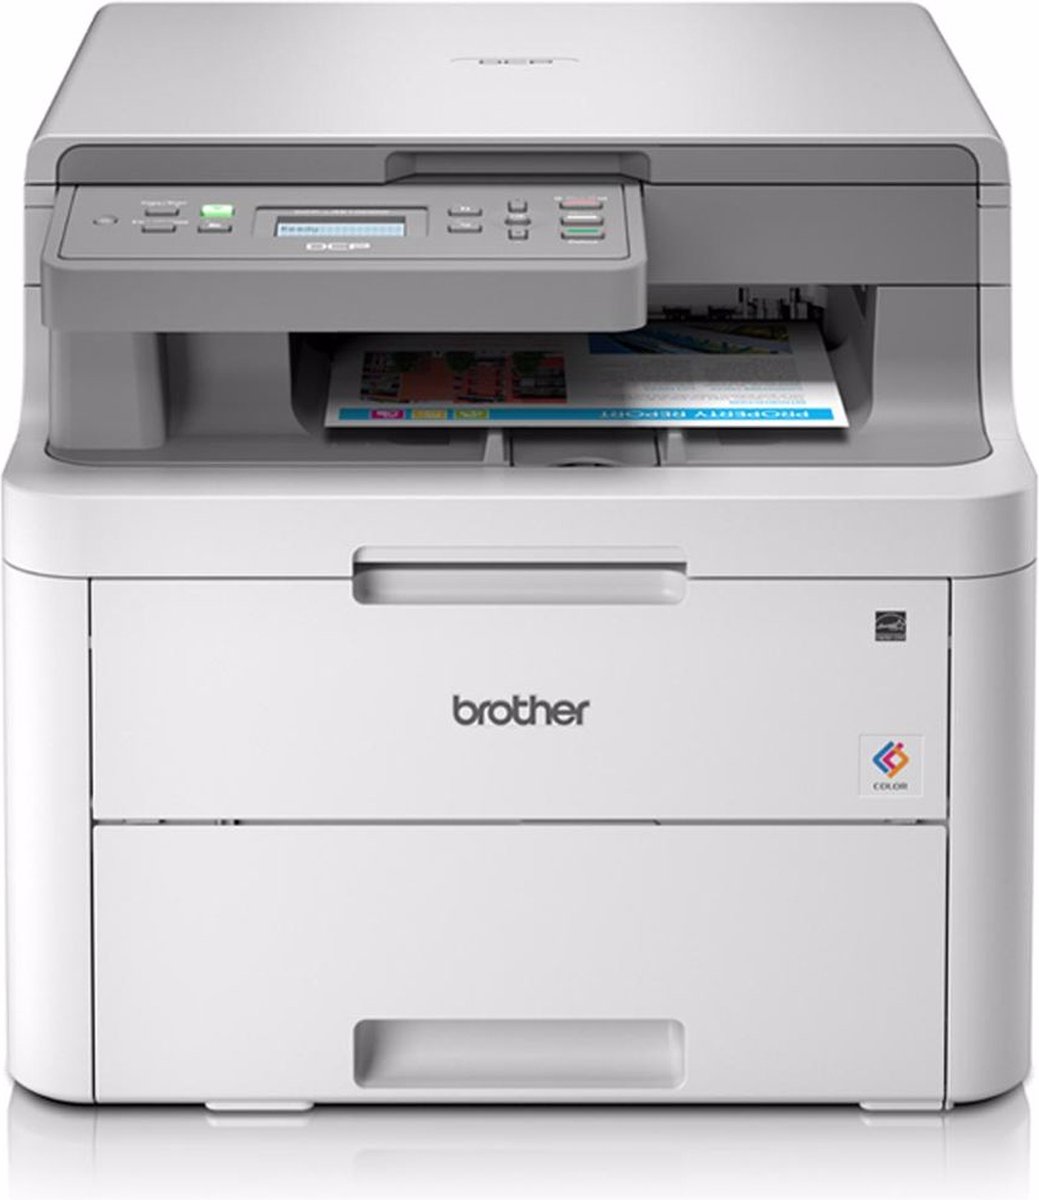 1. Beste LED-printer: Brother DCP-L3510CDW - All-In-One Printer